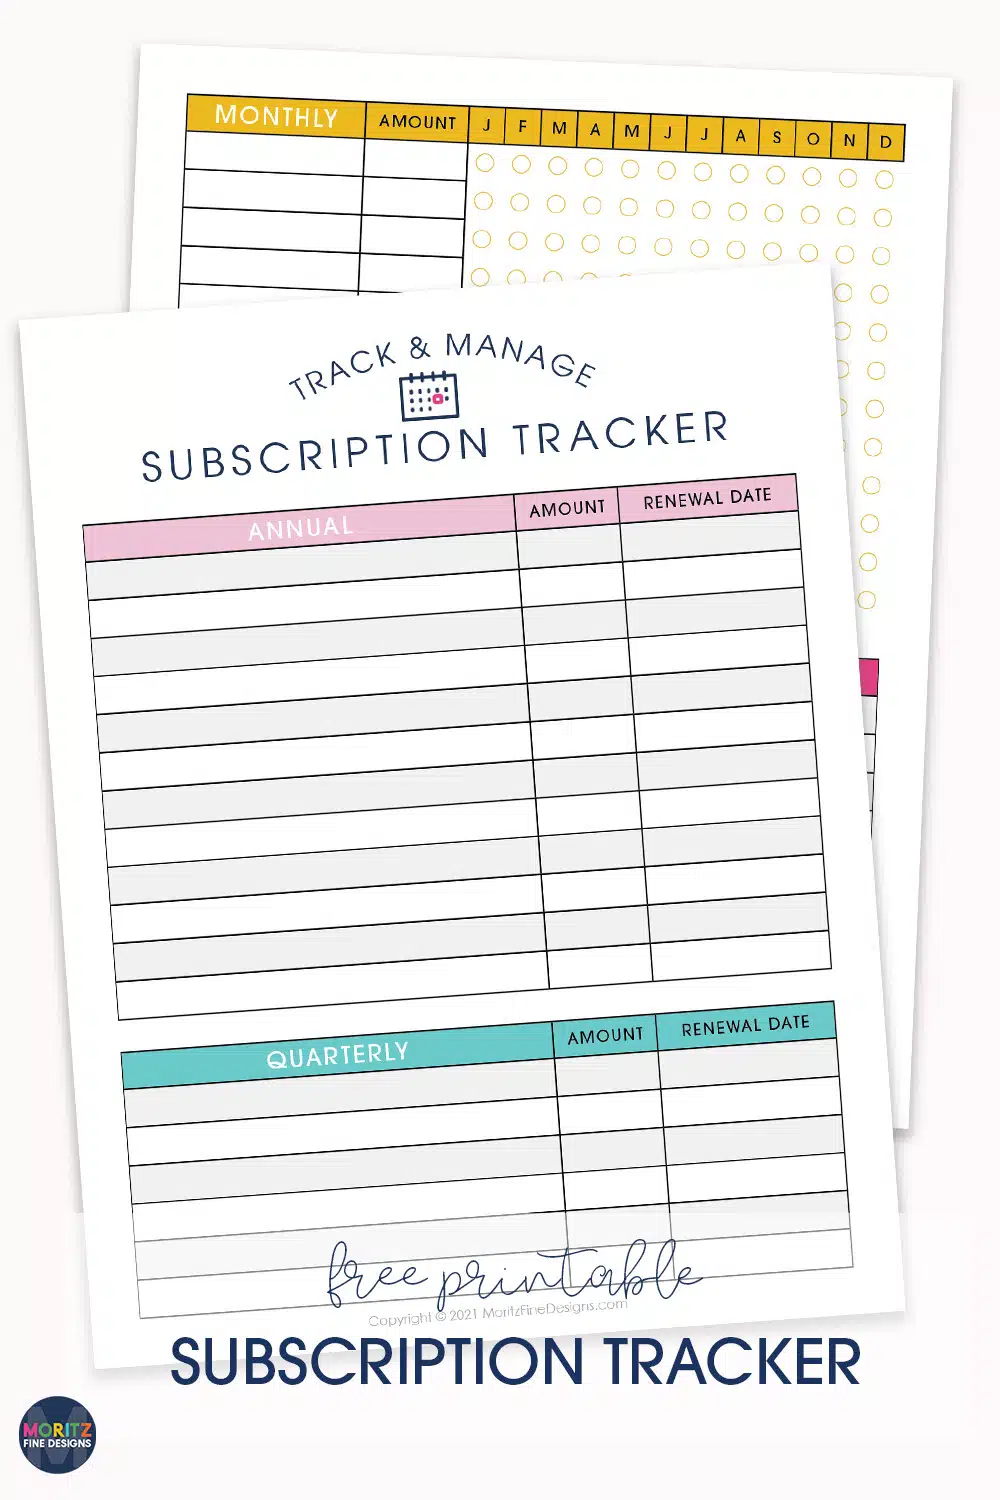 Keep track of all your subscriptions and know when they are set to auto-renew using the free printable Subscription Tracker.